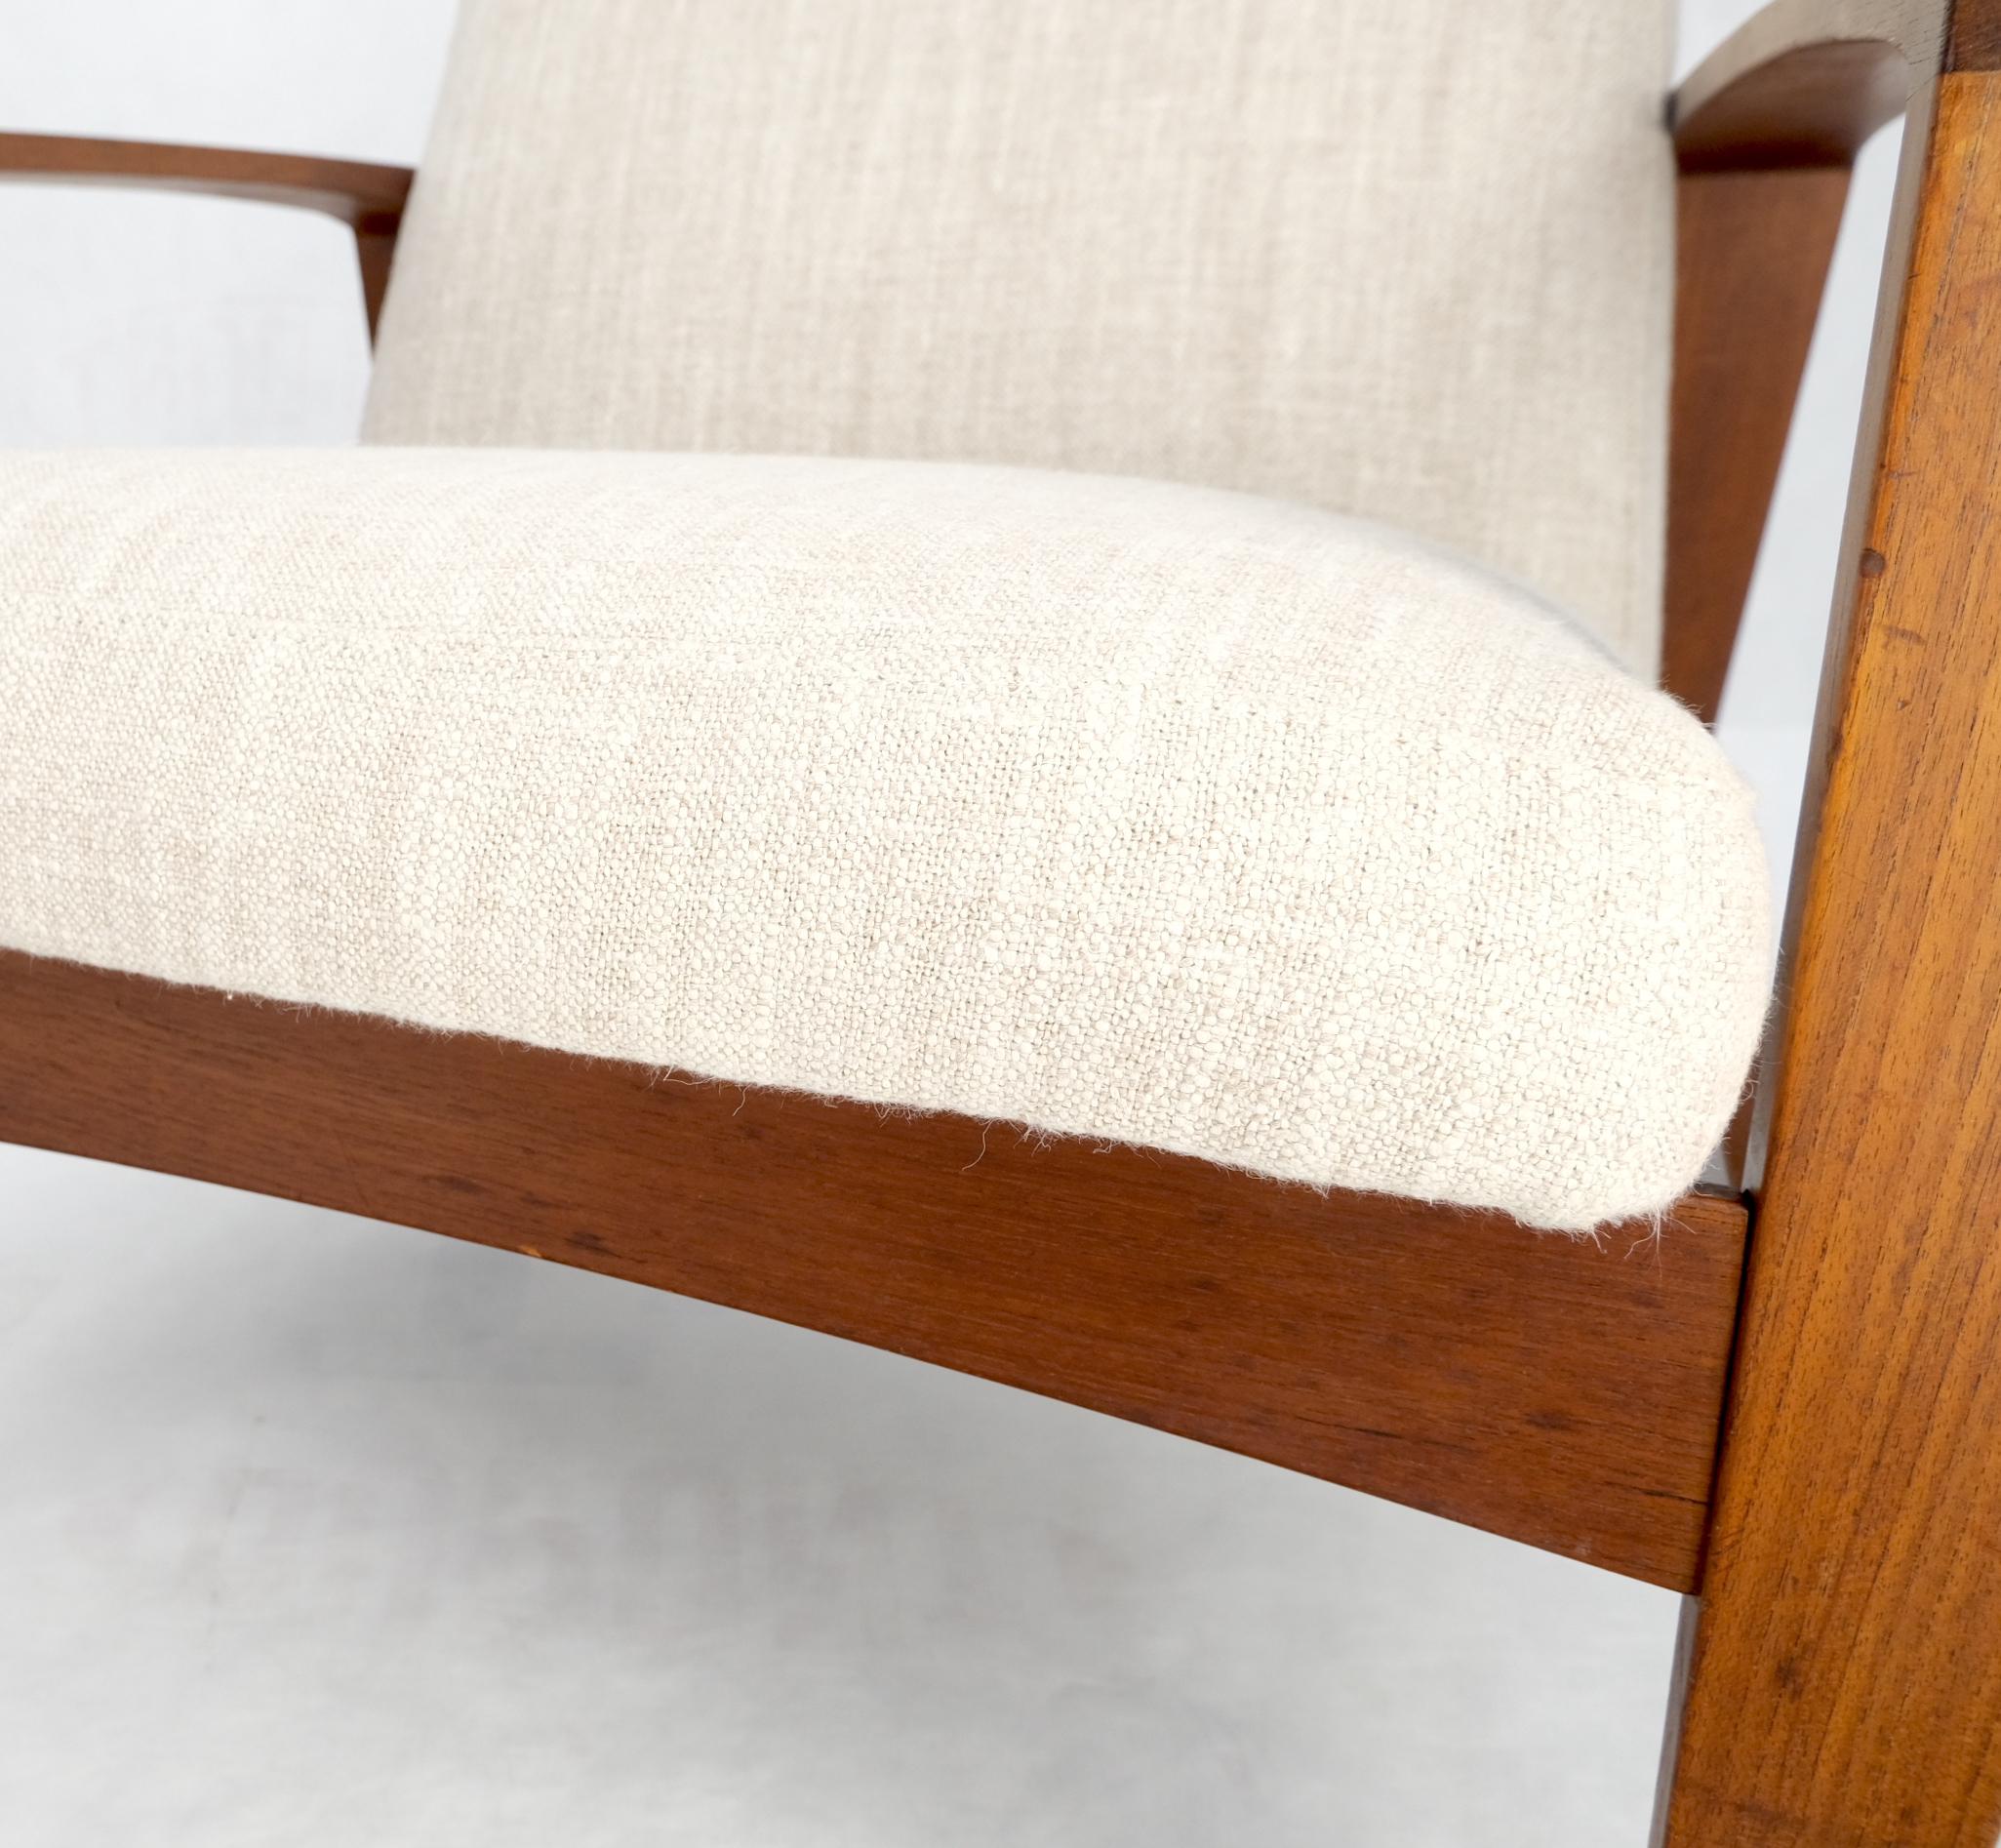 Pair Restored New Oatmeal Upholstery Teak Mid-Century Modern Lounge Arm Chairs In Good Condition For Sale In Rockaway, NJ